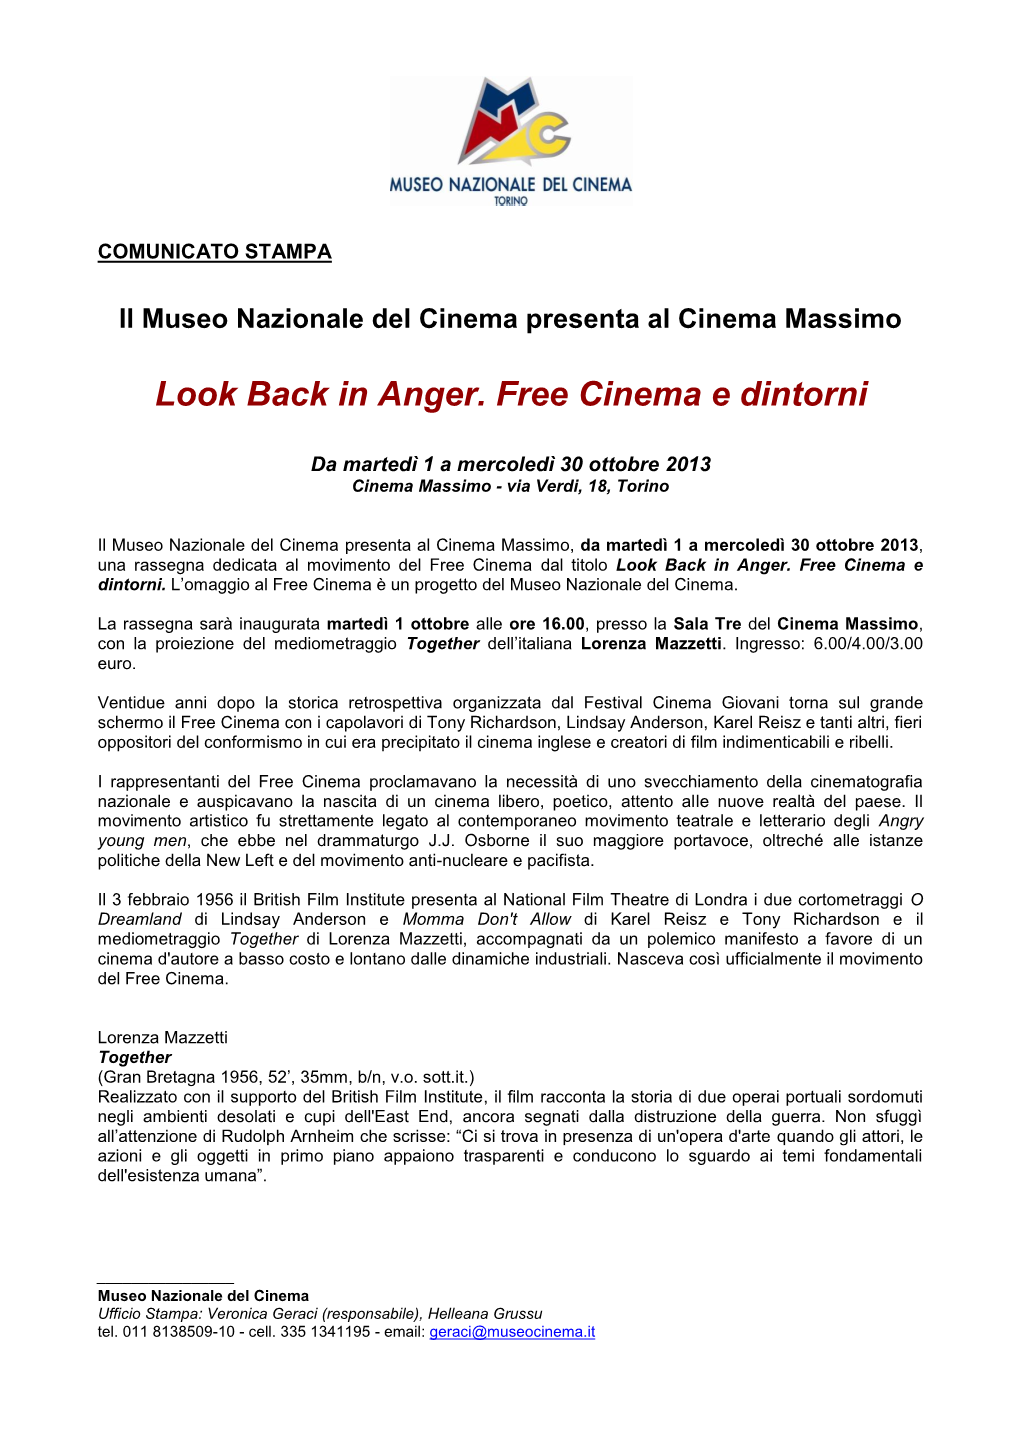 Look Back in Anger. Free Cinema E Dintorni